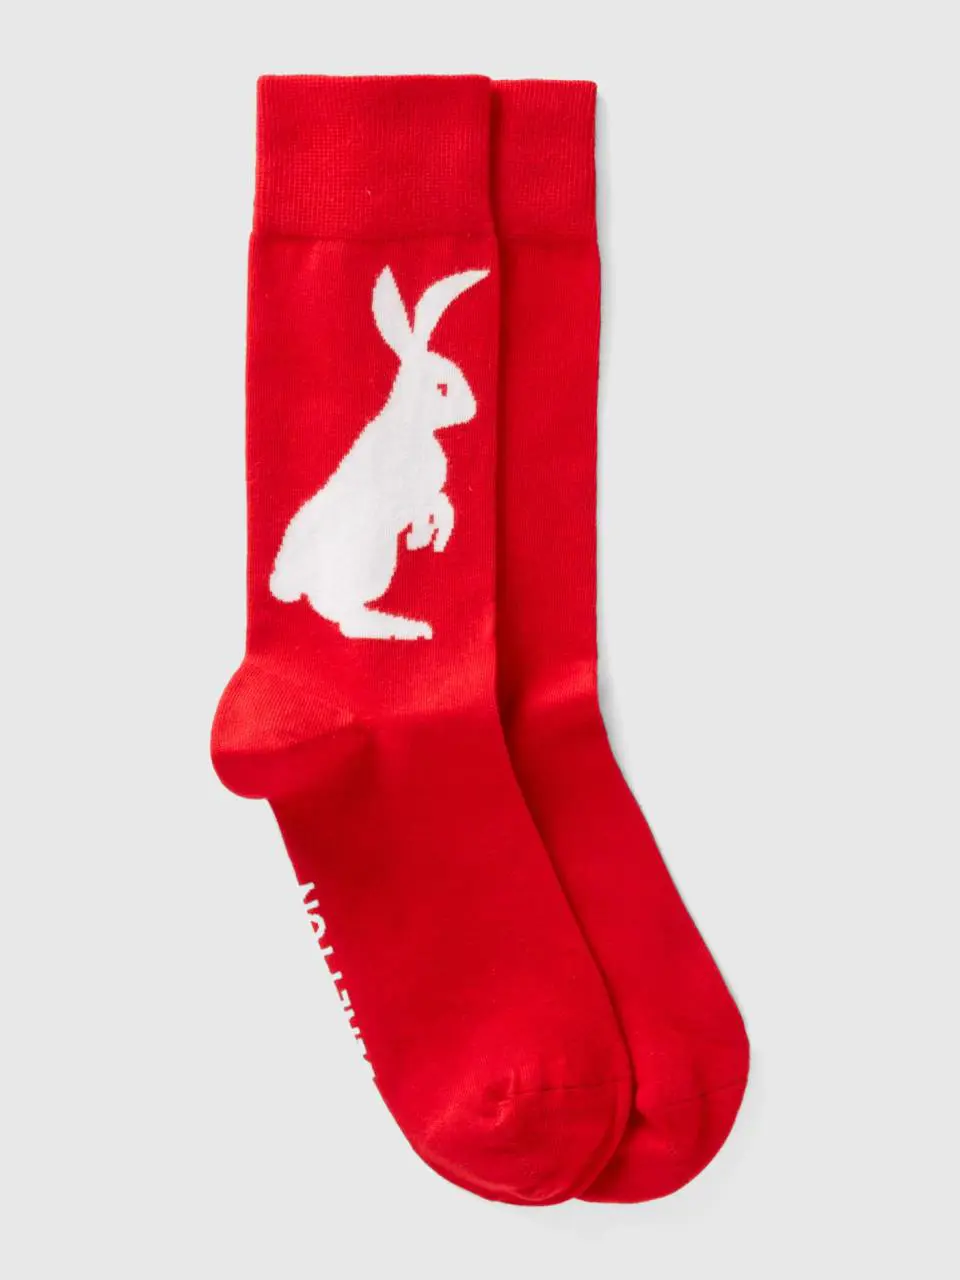 Benetton red socks with bunny design. 1